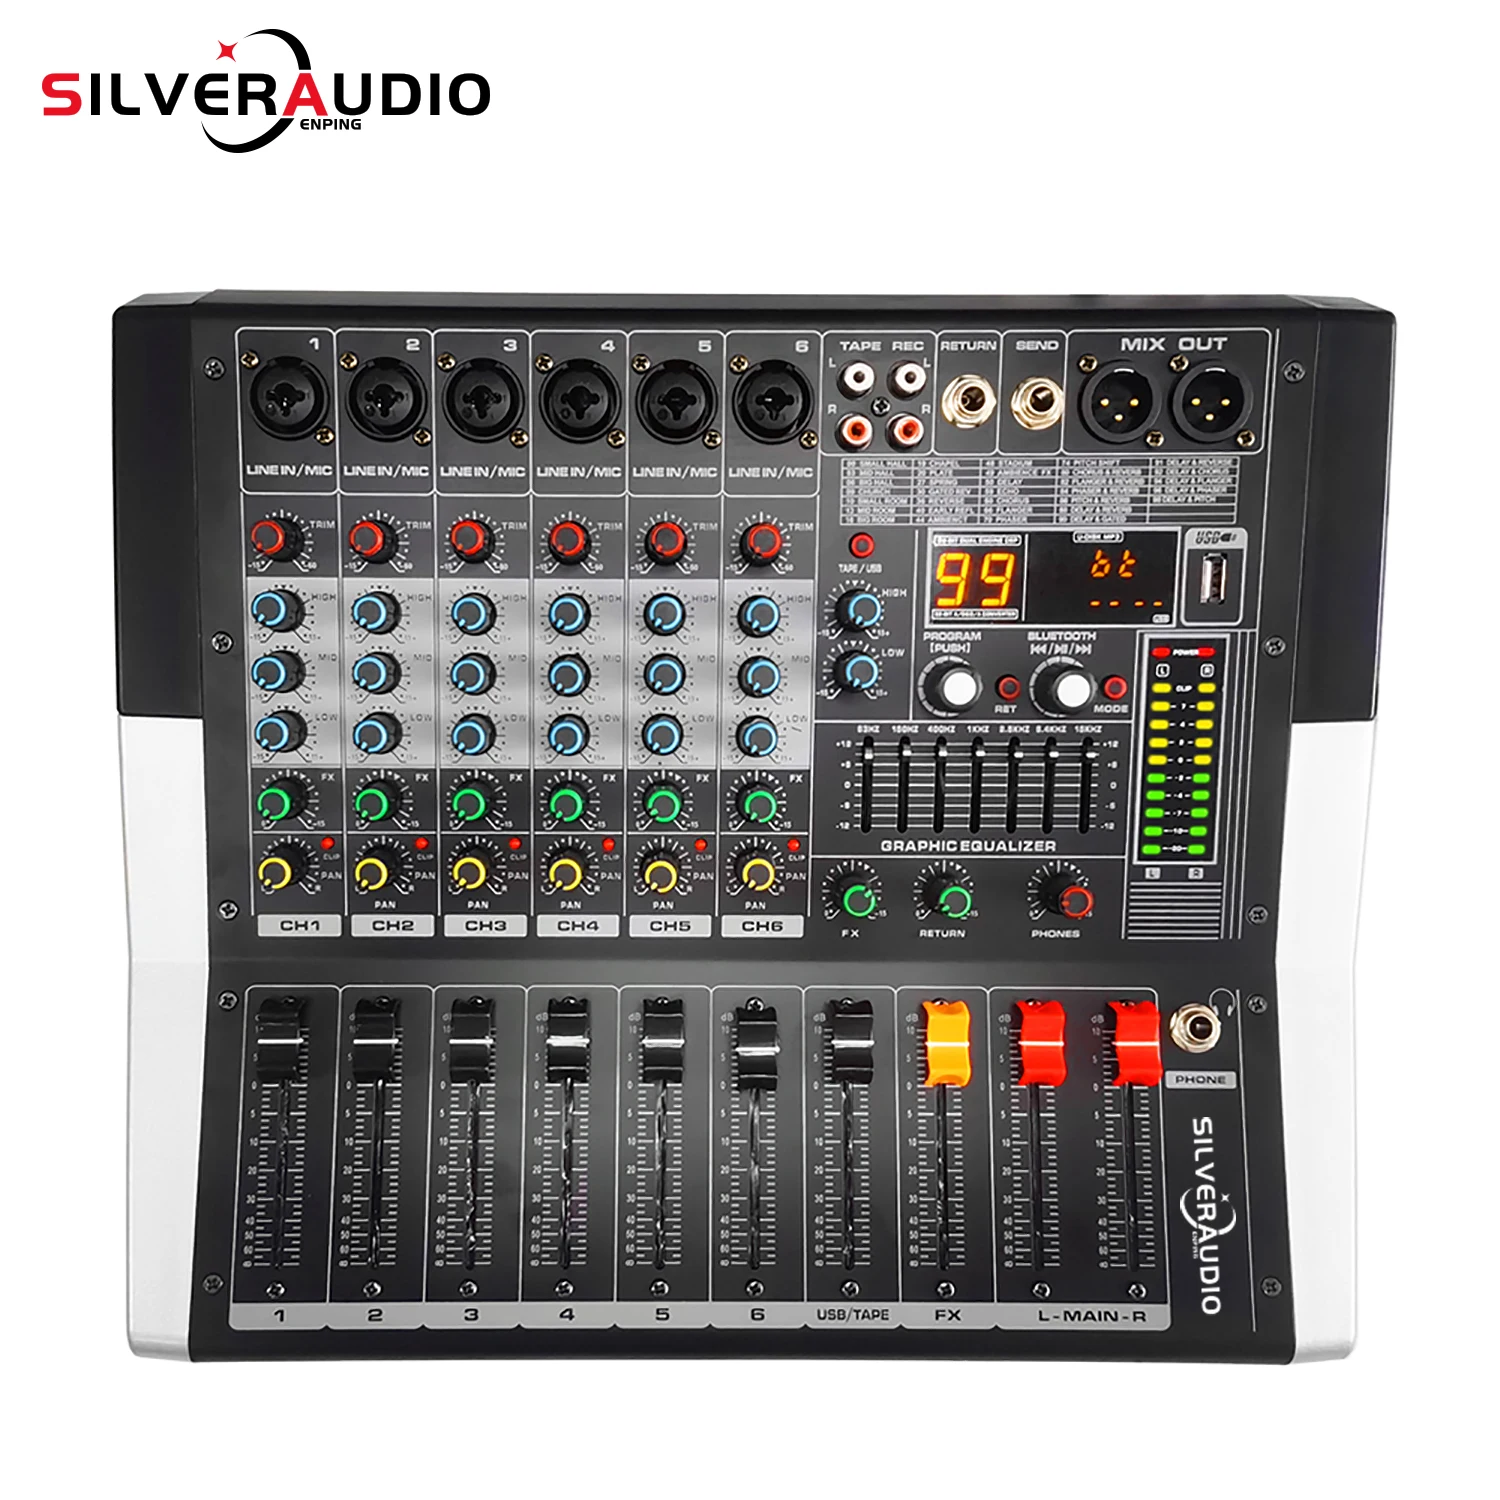 

GAX-ED6 Professional 6-Channel Audio Mixer Powerful 7-band Equalization Audio Mixer With USB Switch For Karaoke Stage KTV